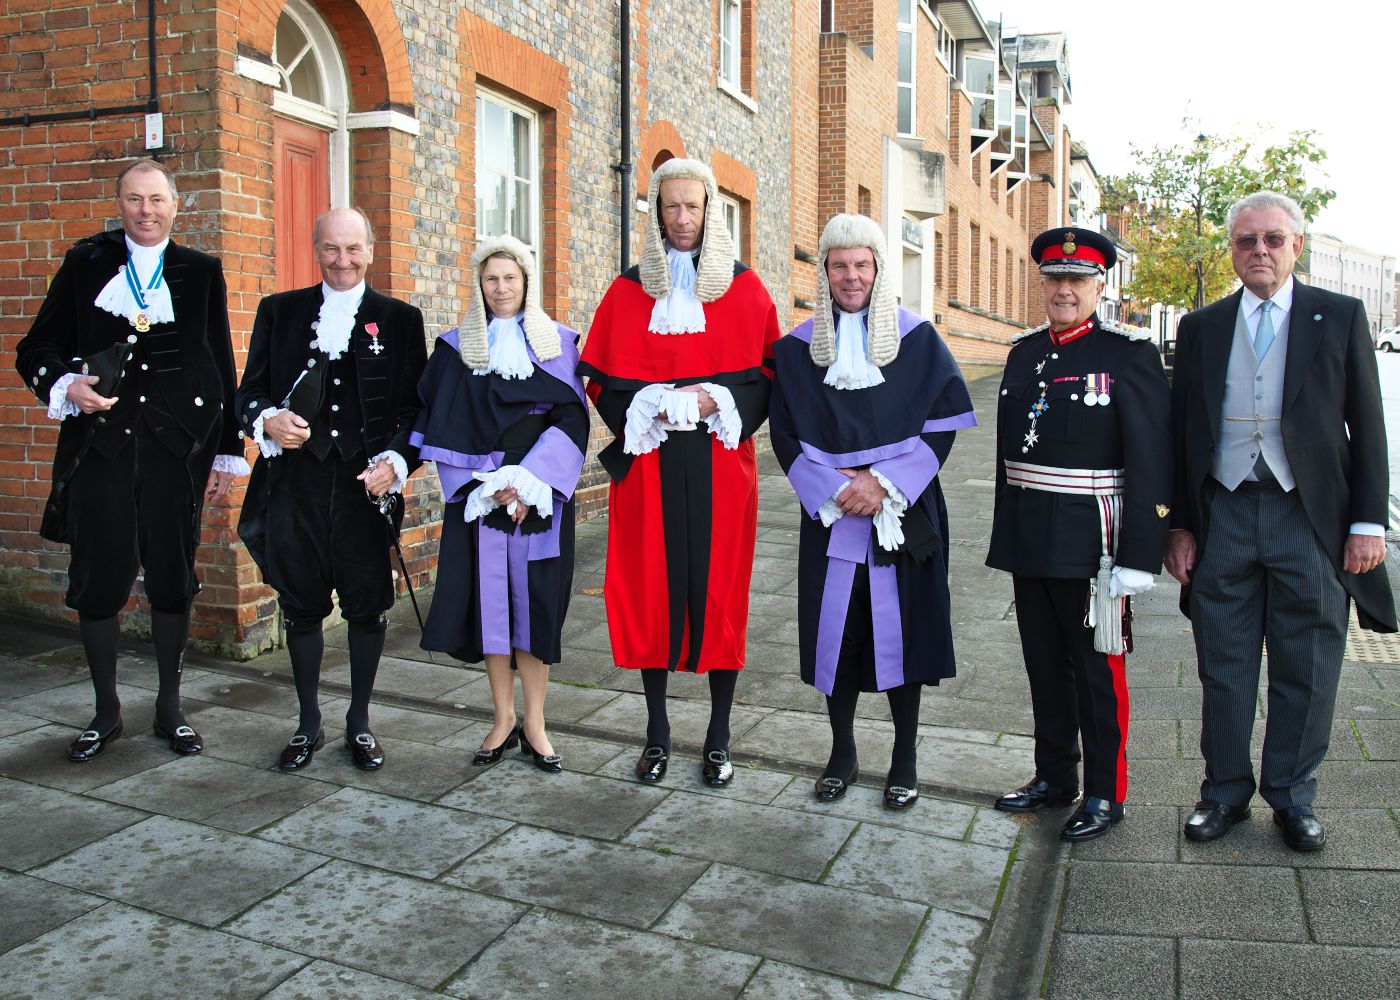 The High Sheriff attending the Law Service on the Isle of Wight together with the High Sheriff of the Isle of Wight, the Lord Lieutenant and the Honorary Recorders of Portsmouth and Southampton.